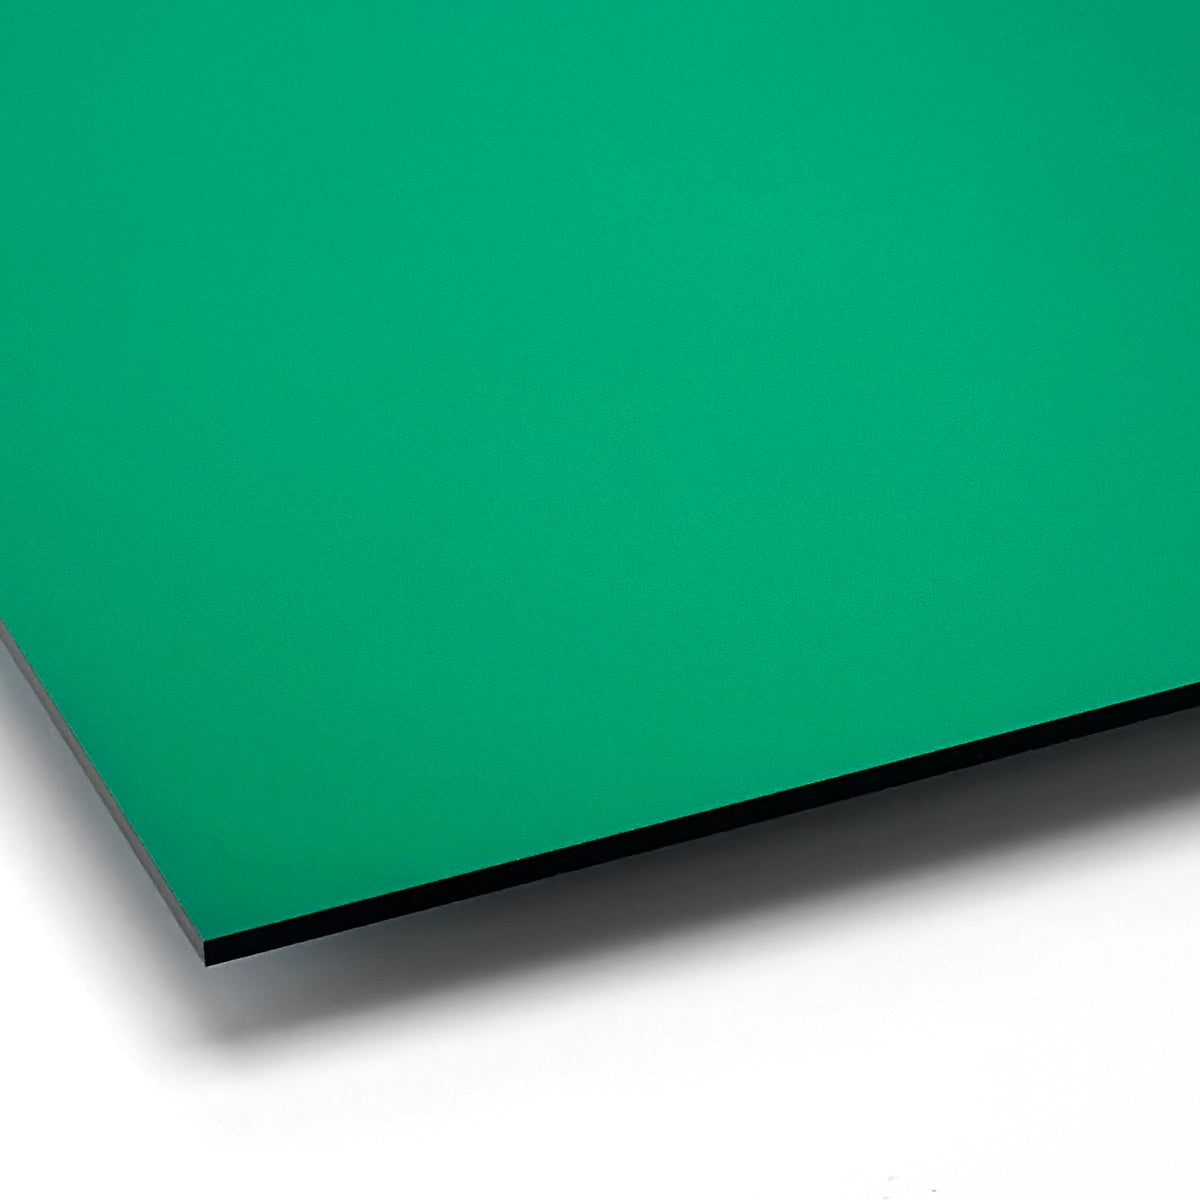 Mirror Green Acrylic with laser cutting only - 600x400mm